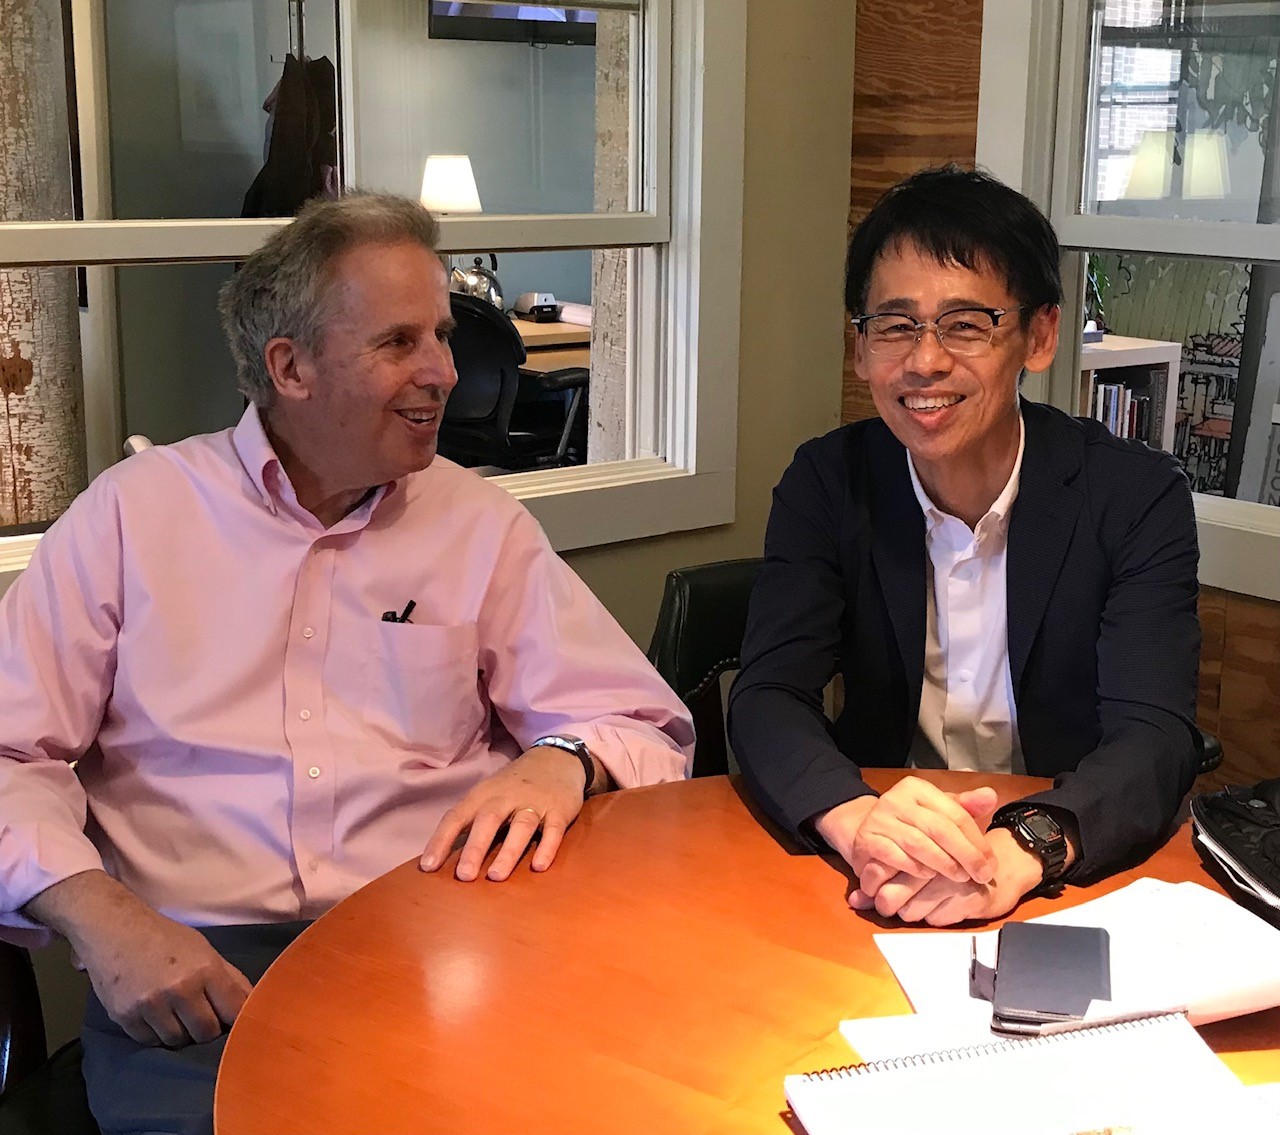 Bob Gibbs, MLARCH’84, celebrates the Japanese publishing of his book, “Town Center” (2021), with his co-author, Tatsuya Yagi. The book, a best-seller in Japan, introduces American town planning best practices to Japanese cities and real estate developers.